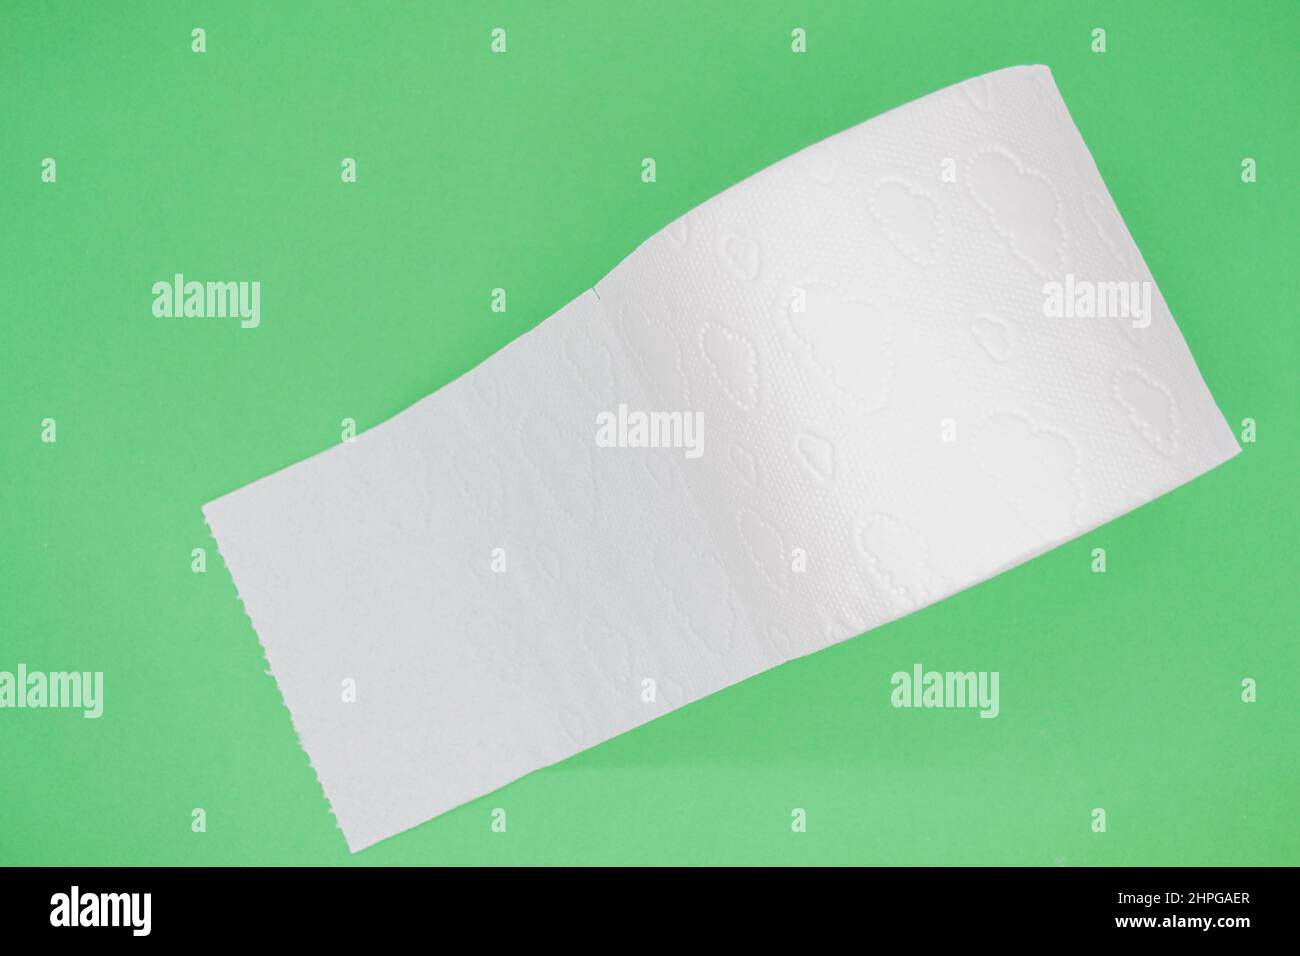 Top view of roll of white toilet paper with perforation on a green background. Copy space. Stock Photo